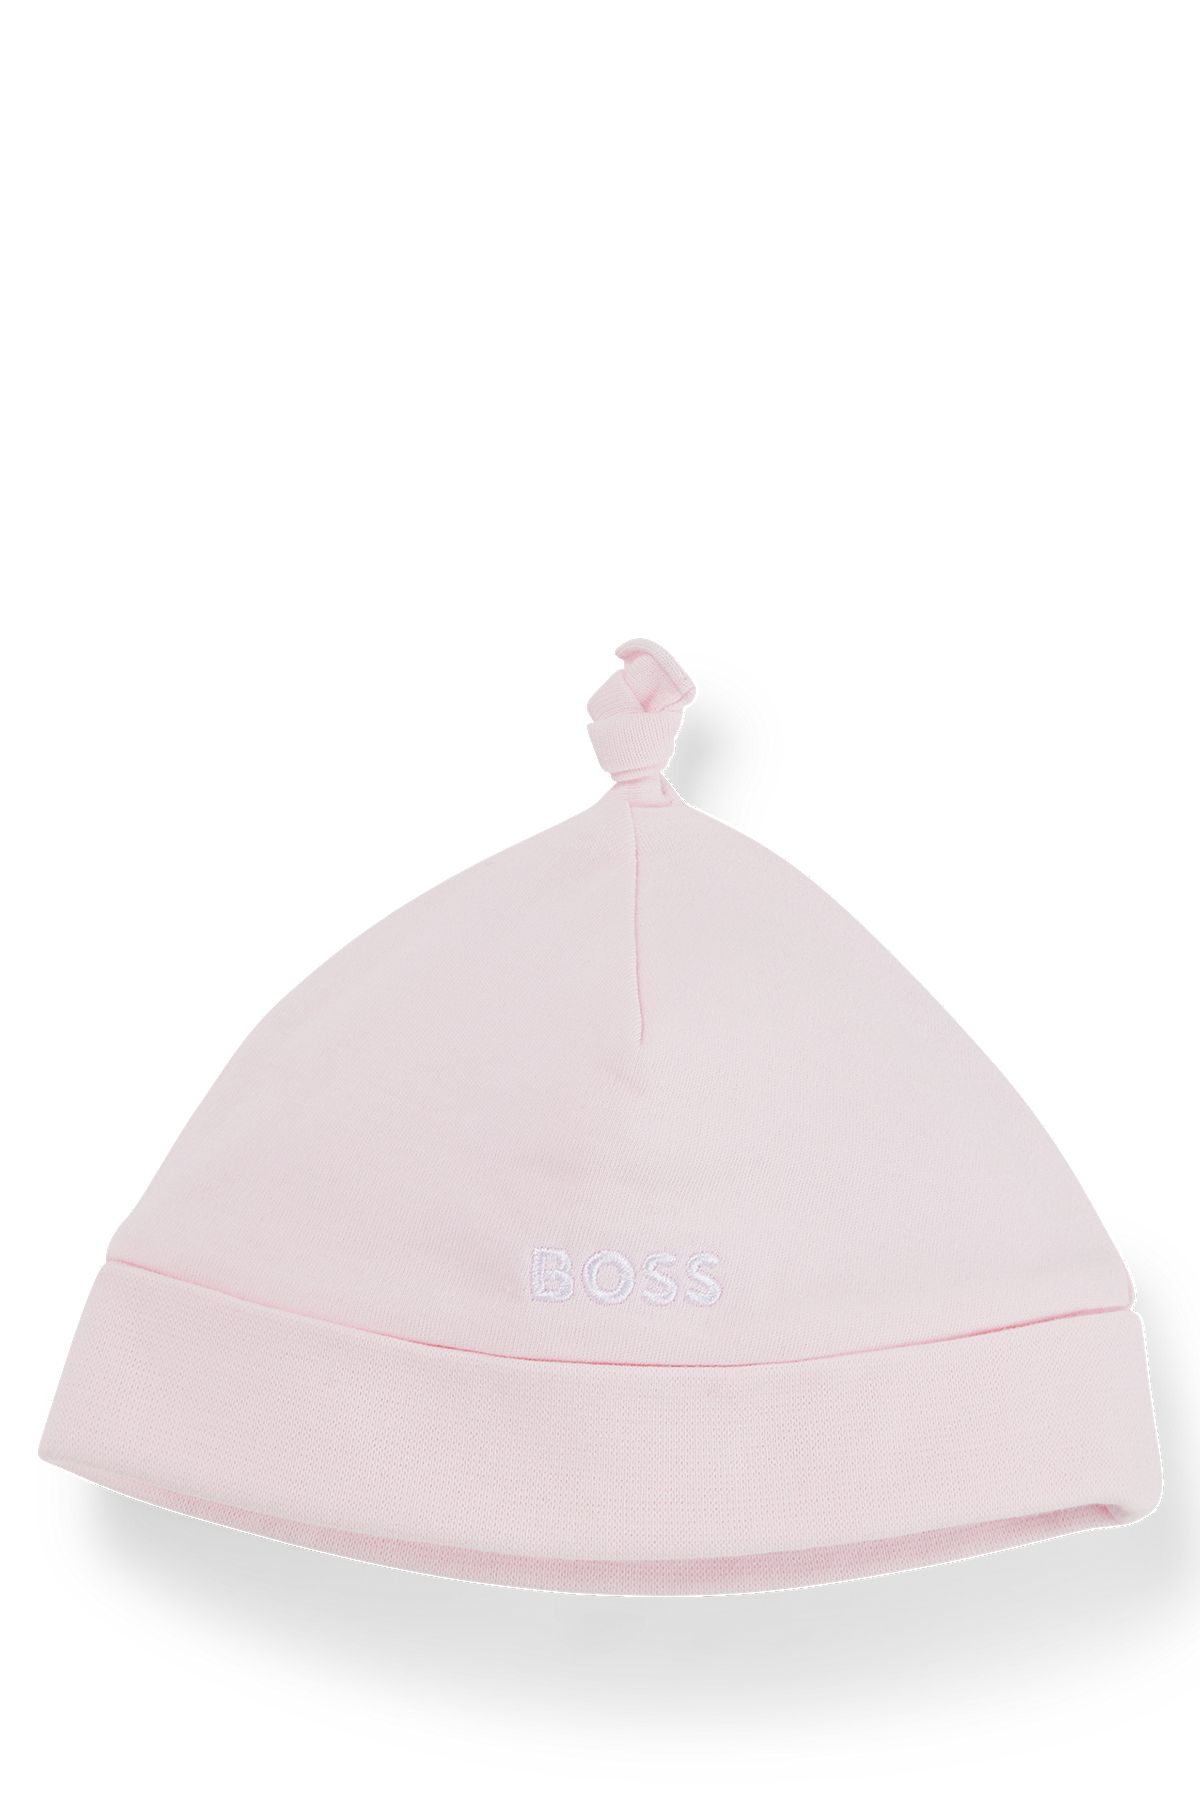 Baby hat in pure cotton with printed logo, light pink